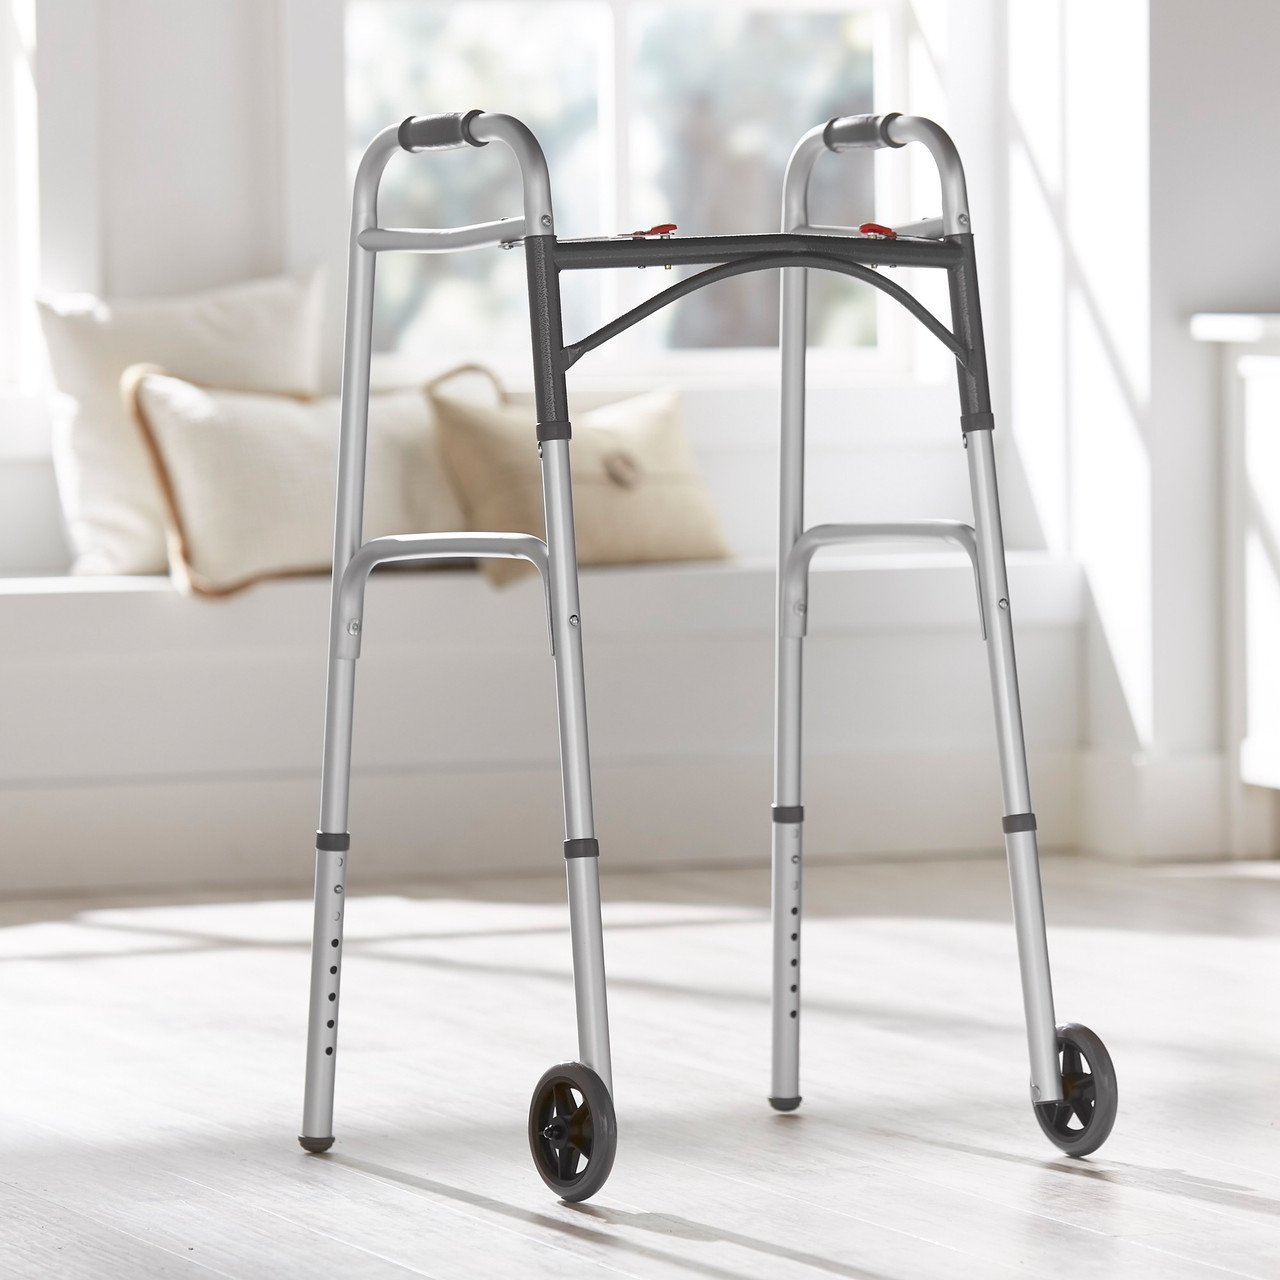 McKesson Folding Walker, 2 Wheels - Aluminum, Adjustable Height - Silver,  32 in to 39 in Height